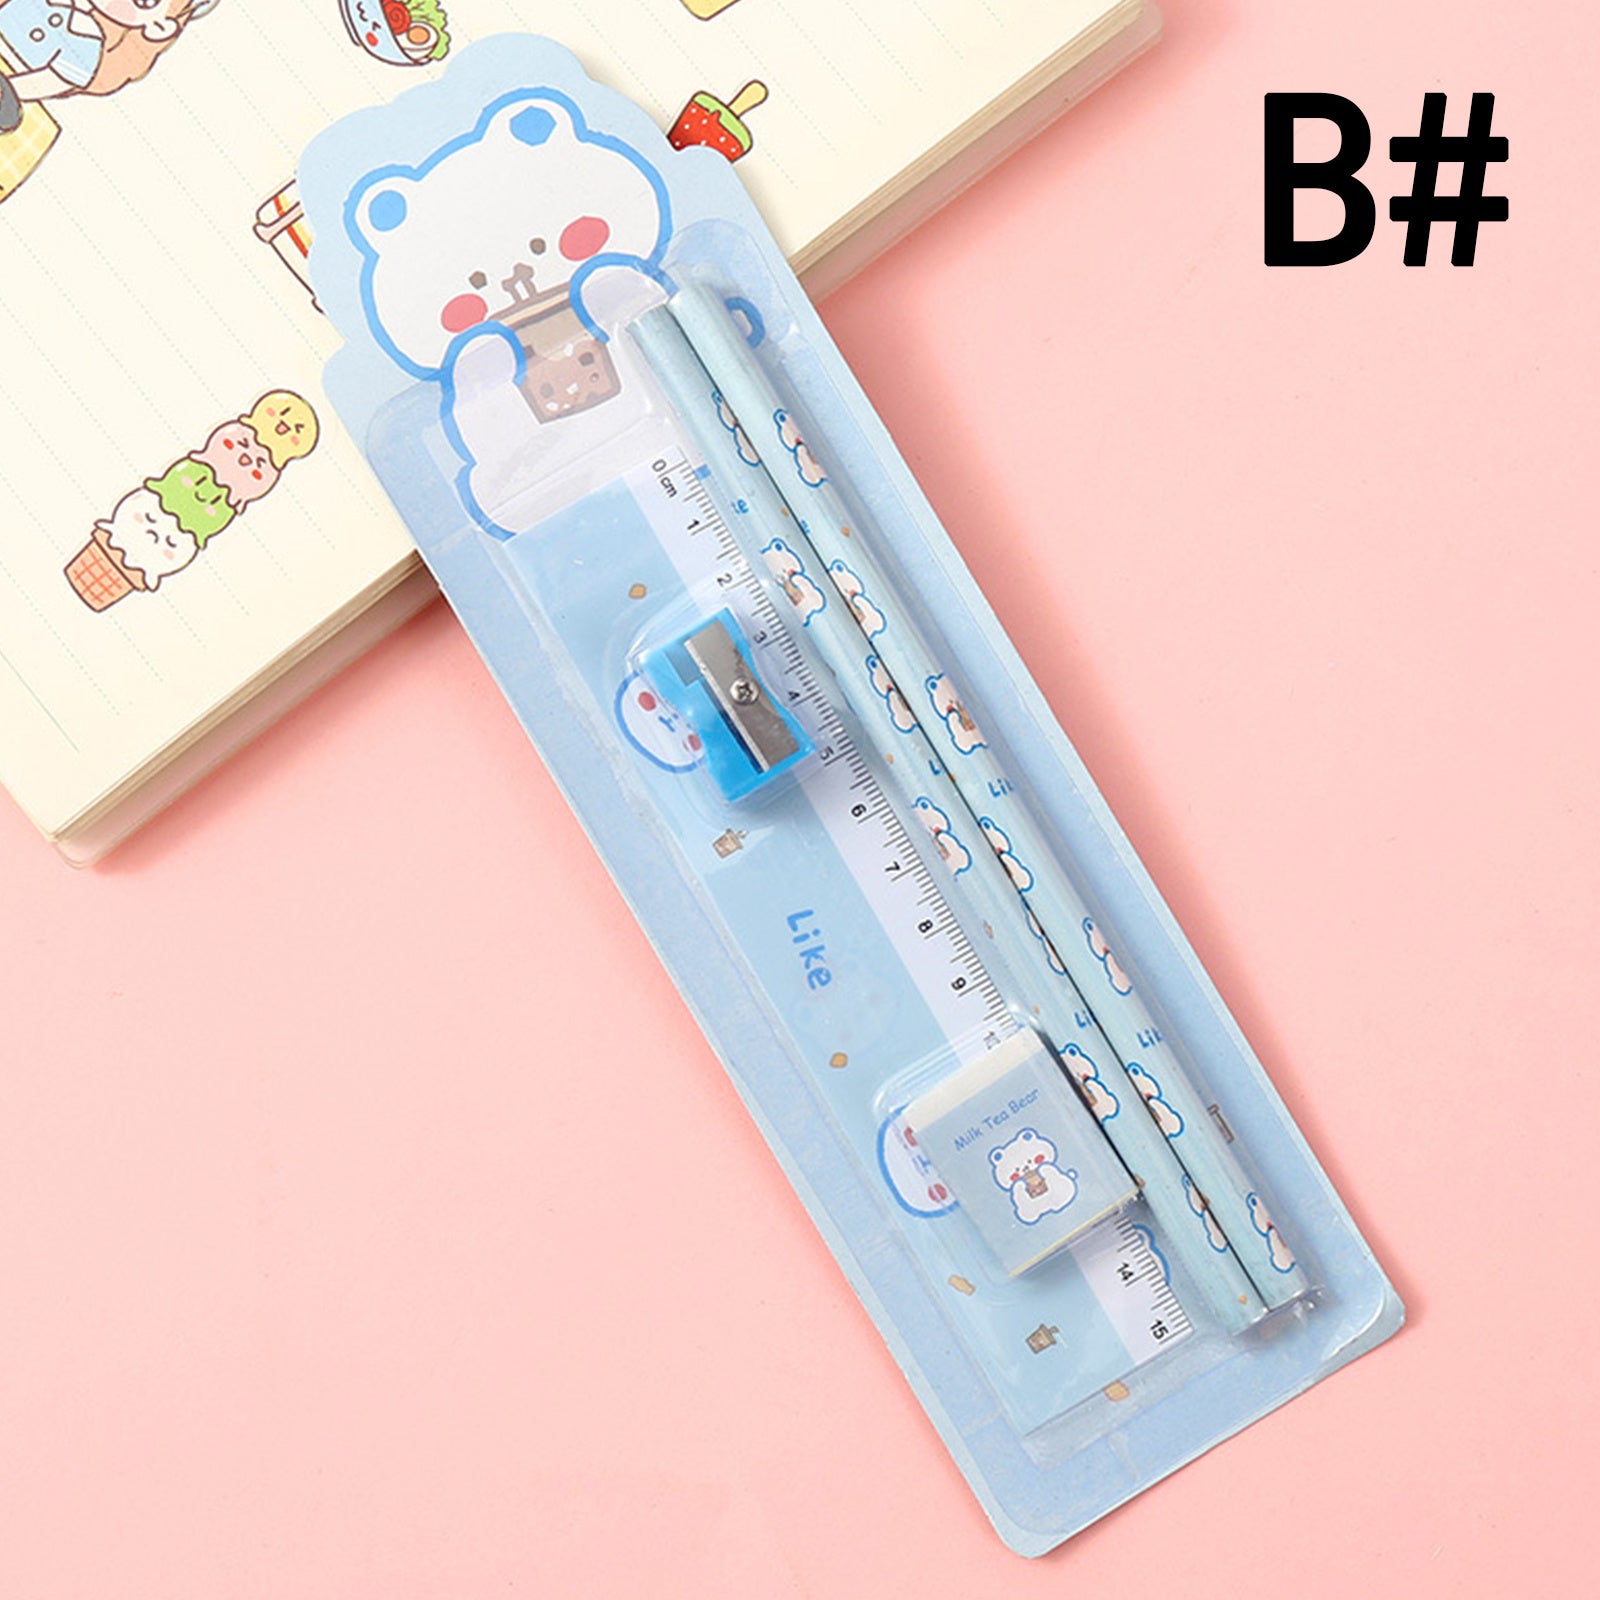 A blue bear-themed plastic ruler with a sliding gauge, designed for a young target audience, placed on an open notebook featuring cartoon drawings.